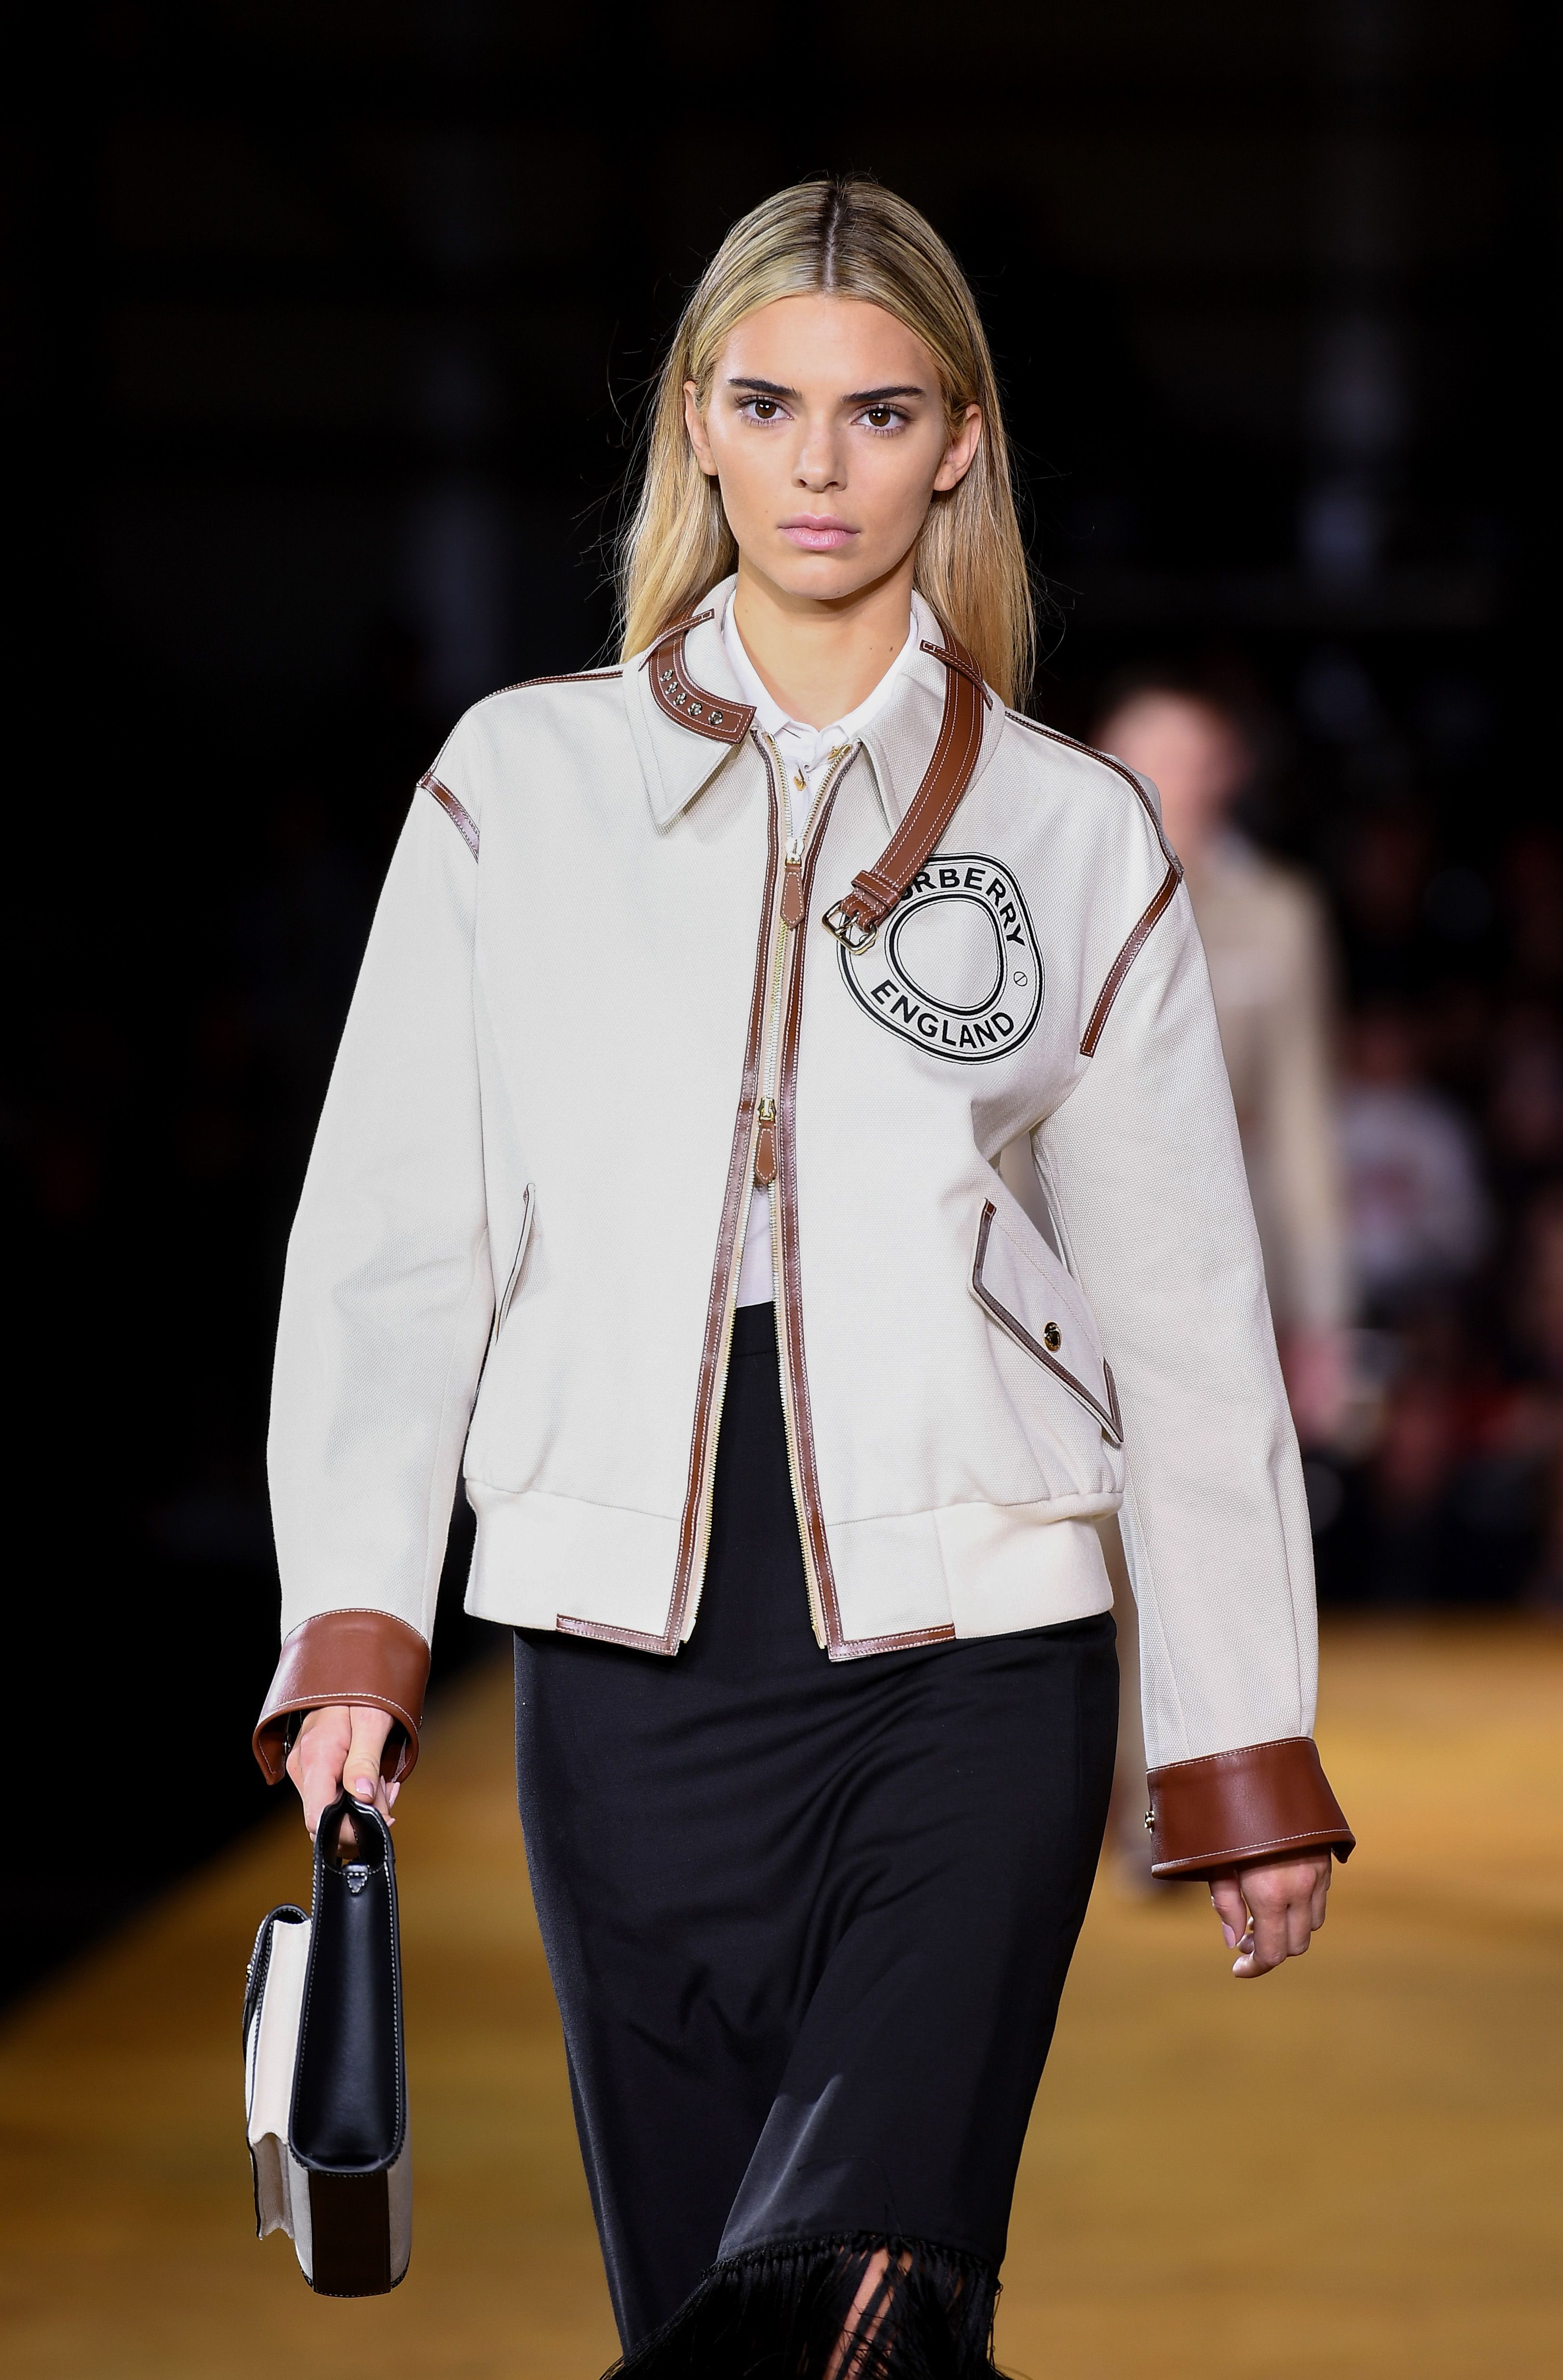 5 Things to Know About Tonight's Burberry Show | Top Celebrities Online